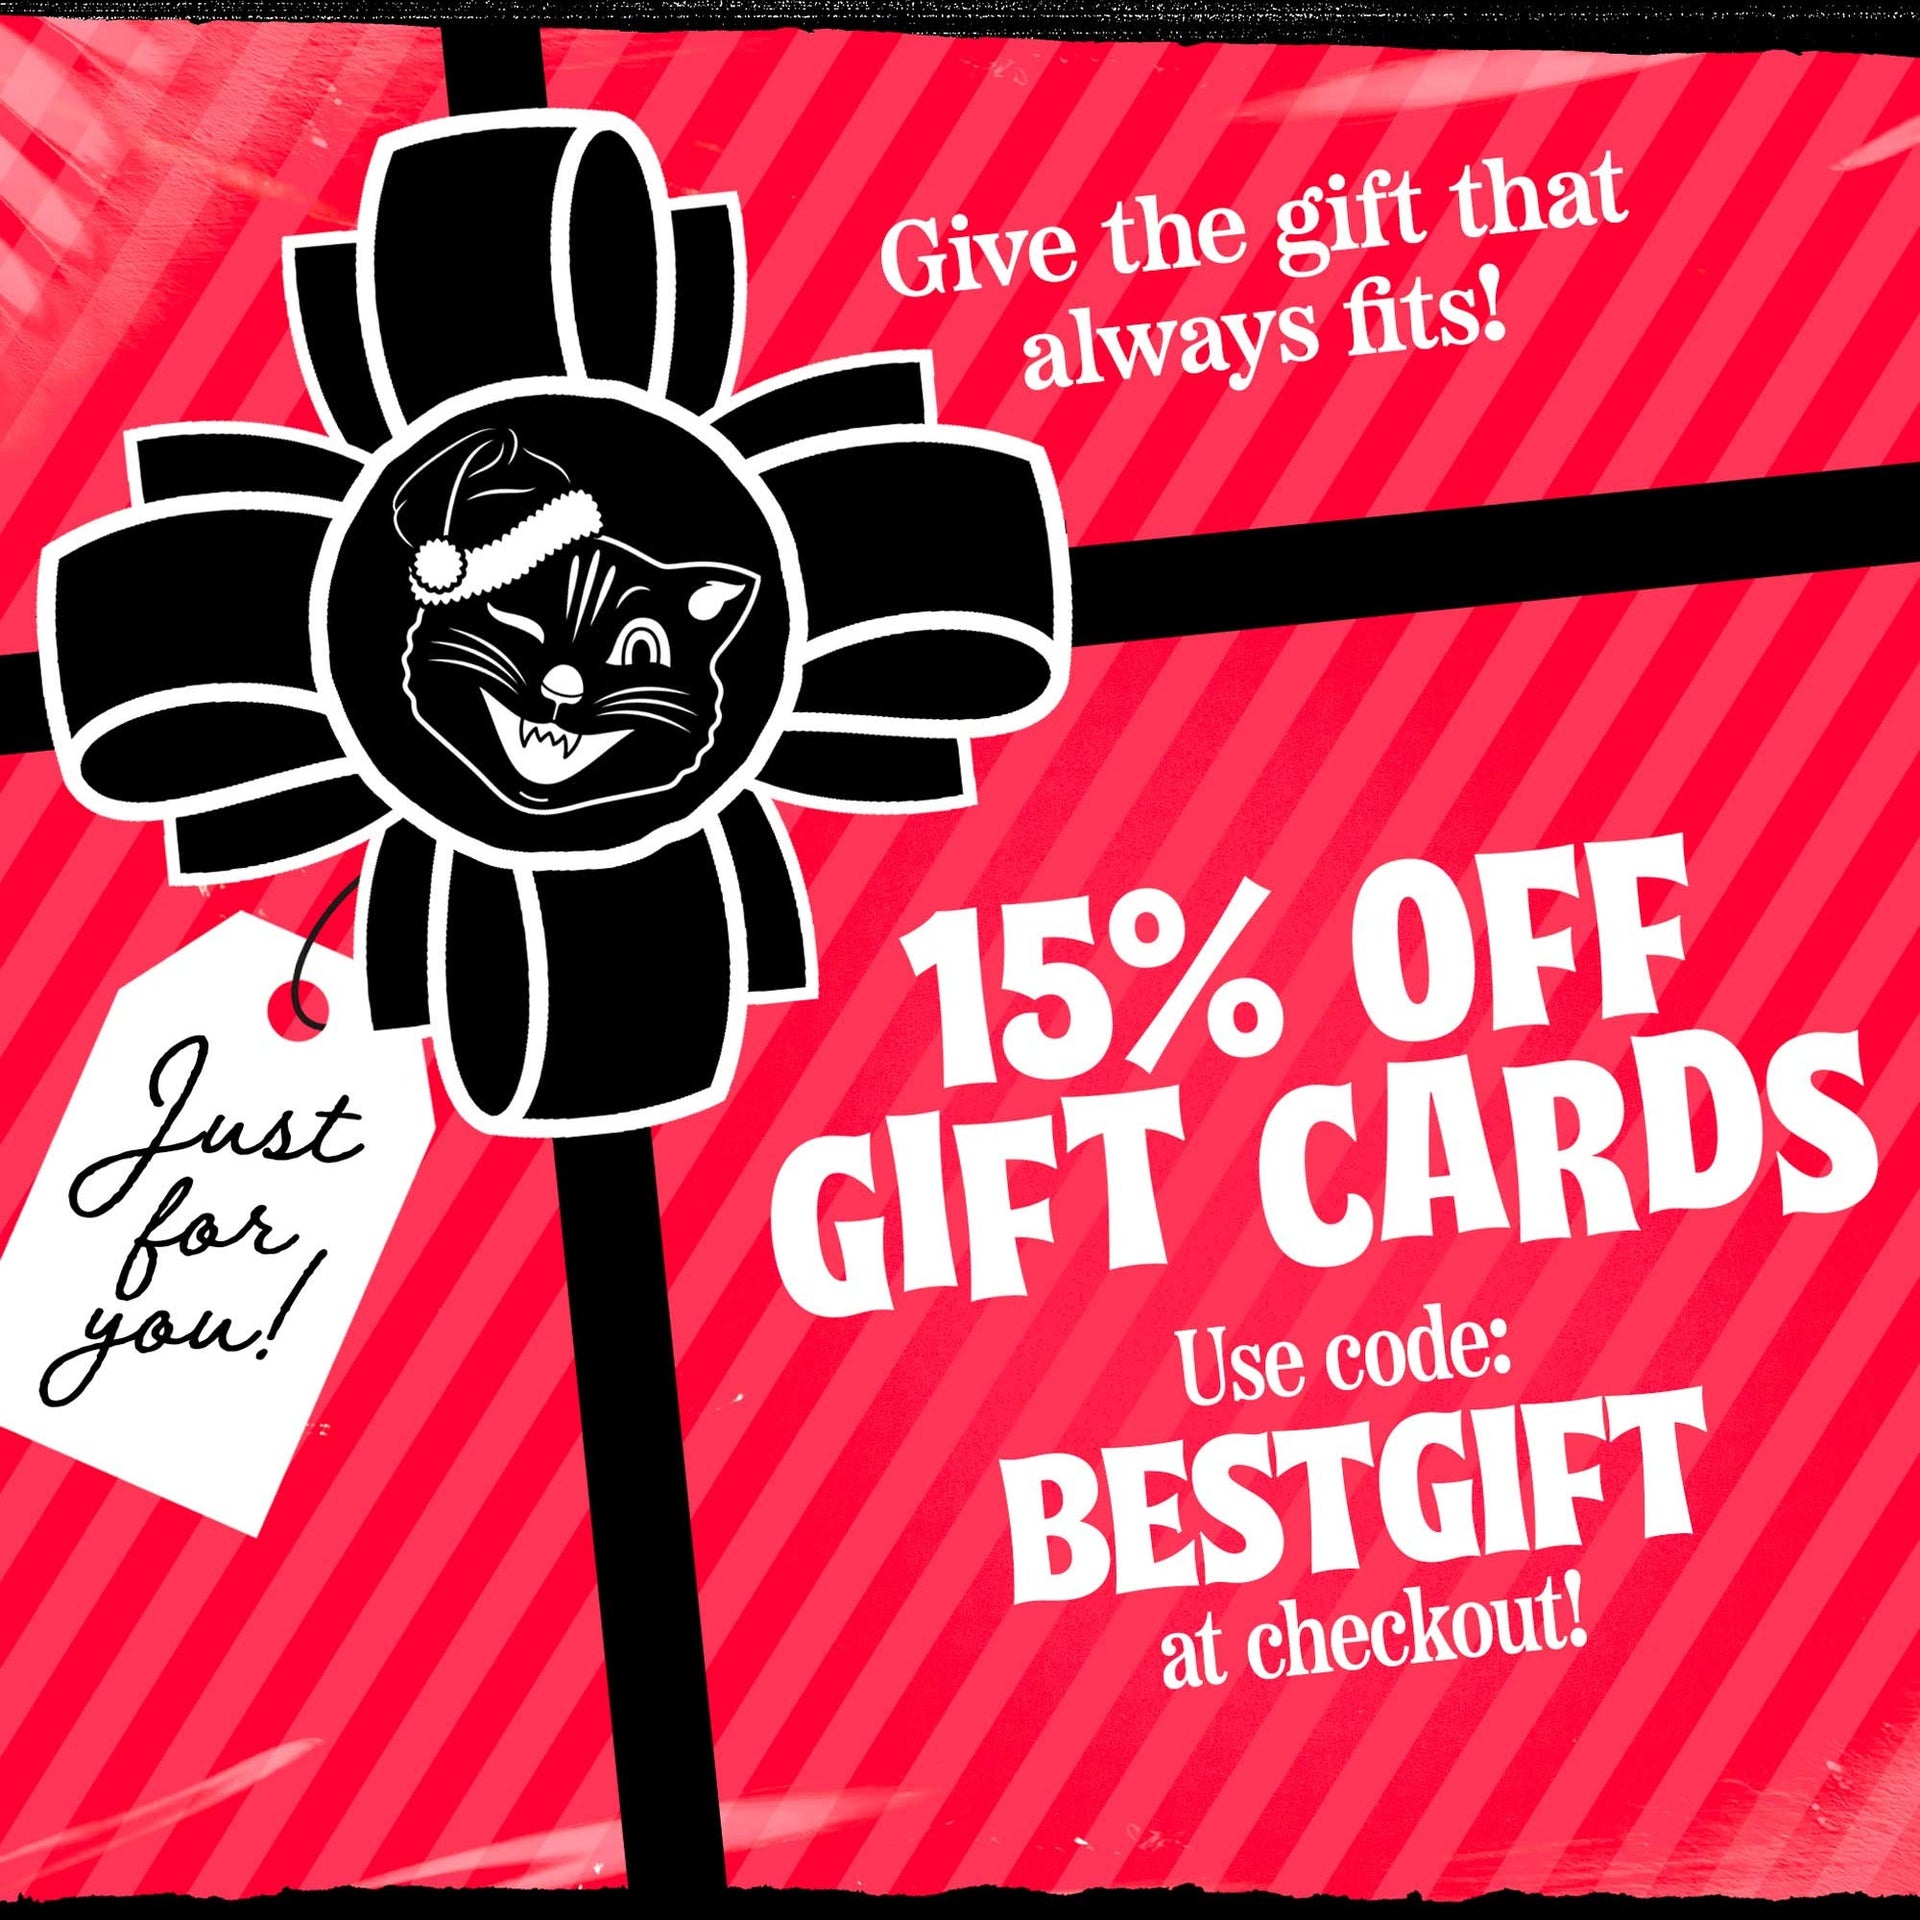 15% Off Gift Cards with Code BESTGIFT Now Thru 12/24!